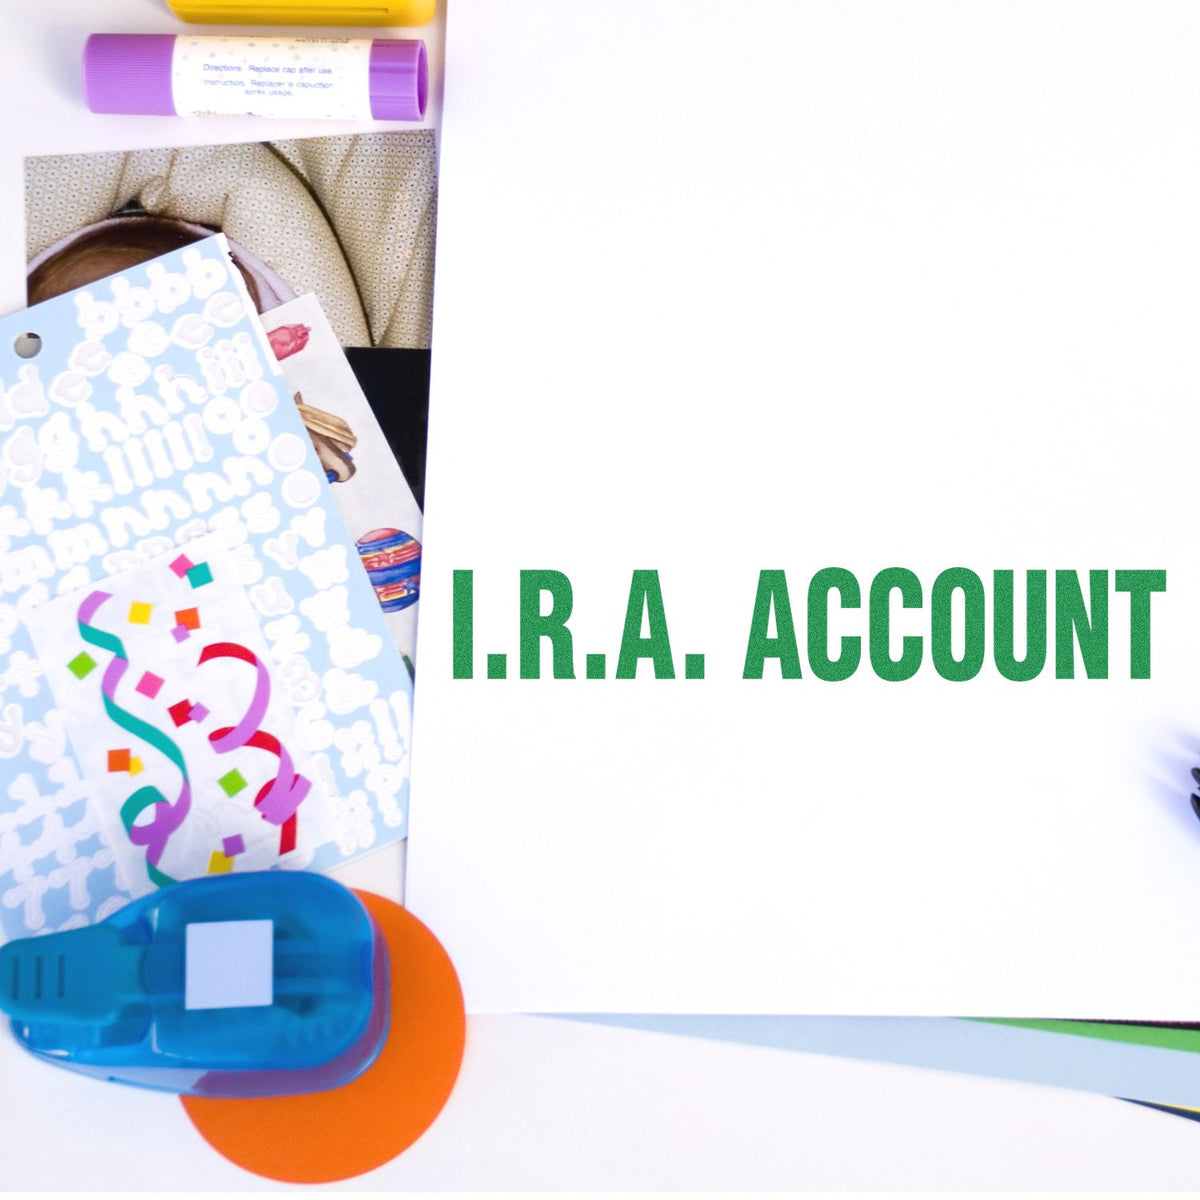 Ira Account Rubber Stamp In Use